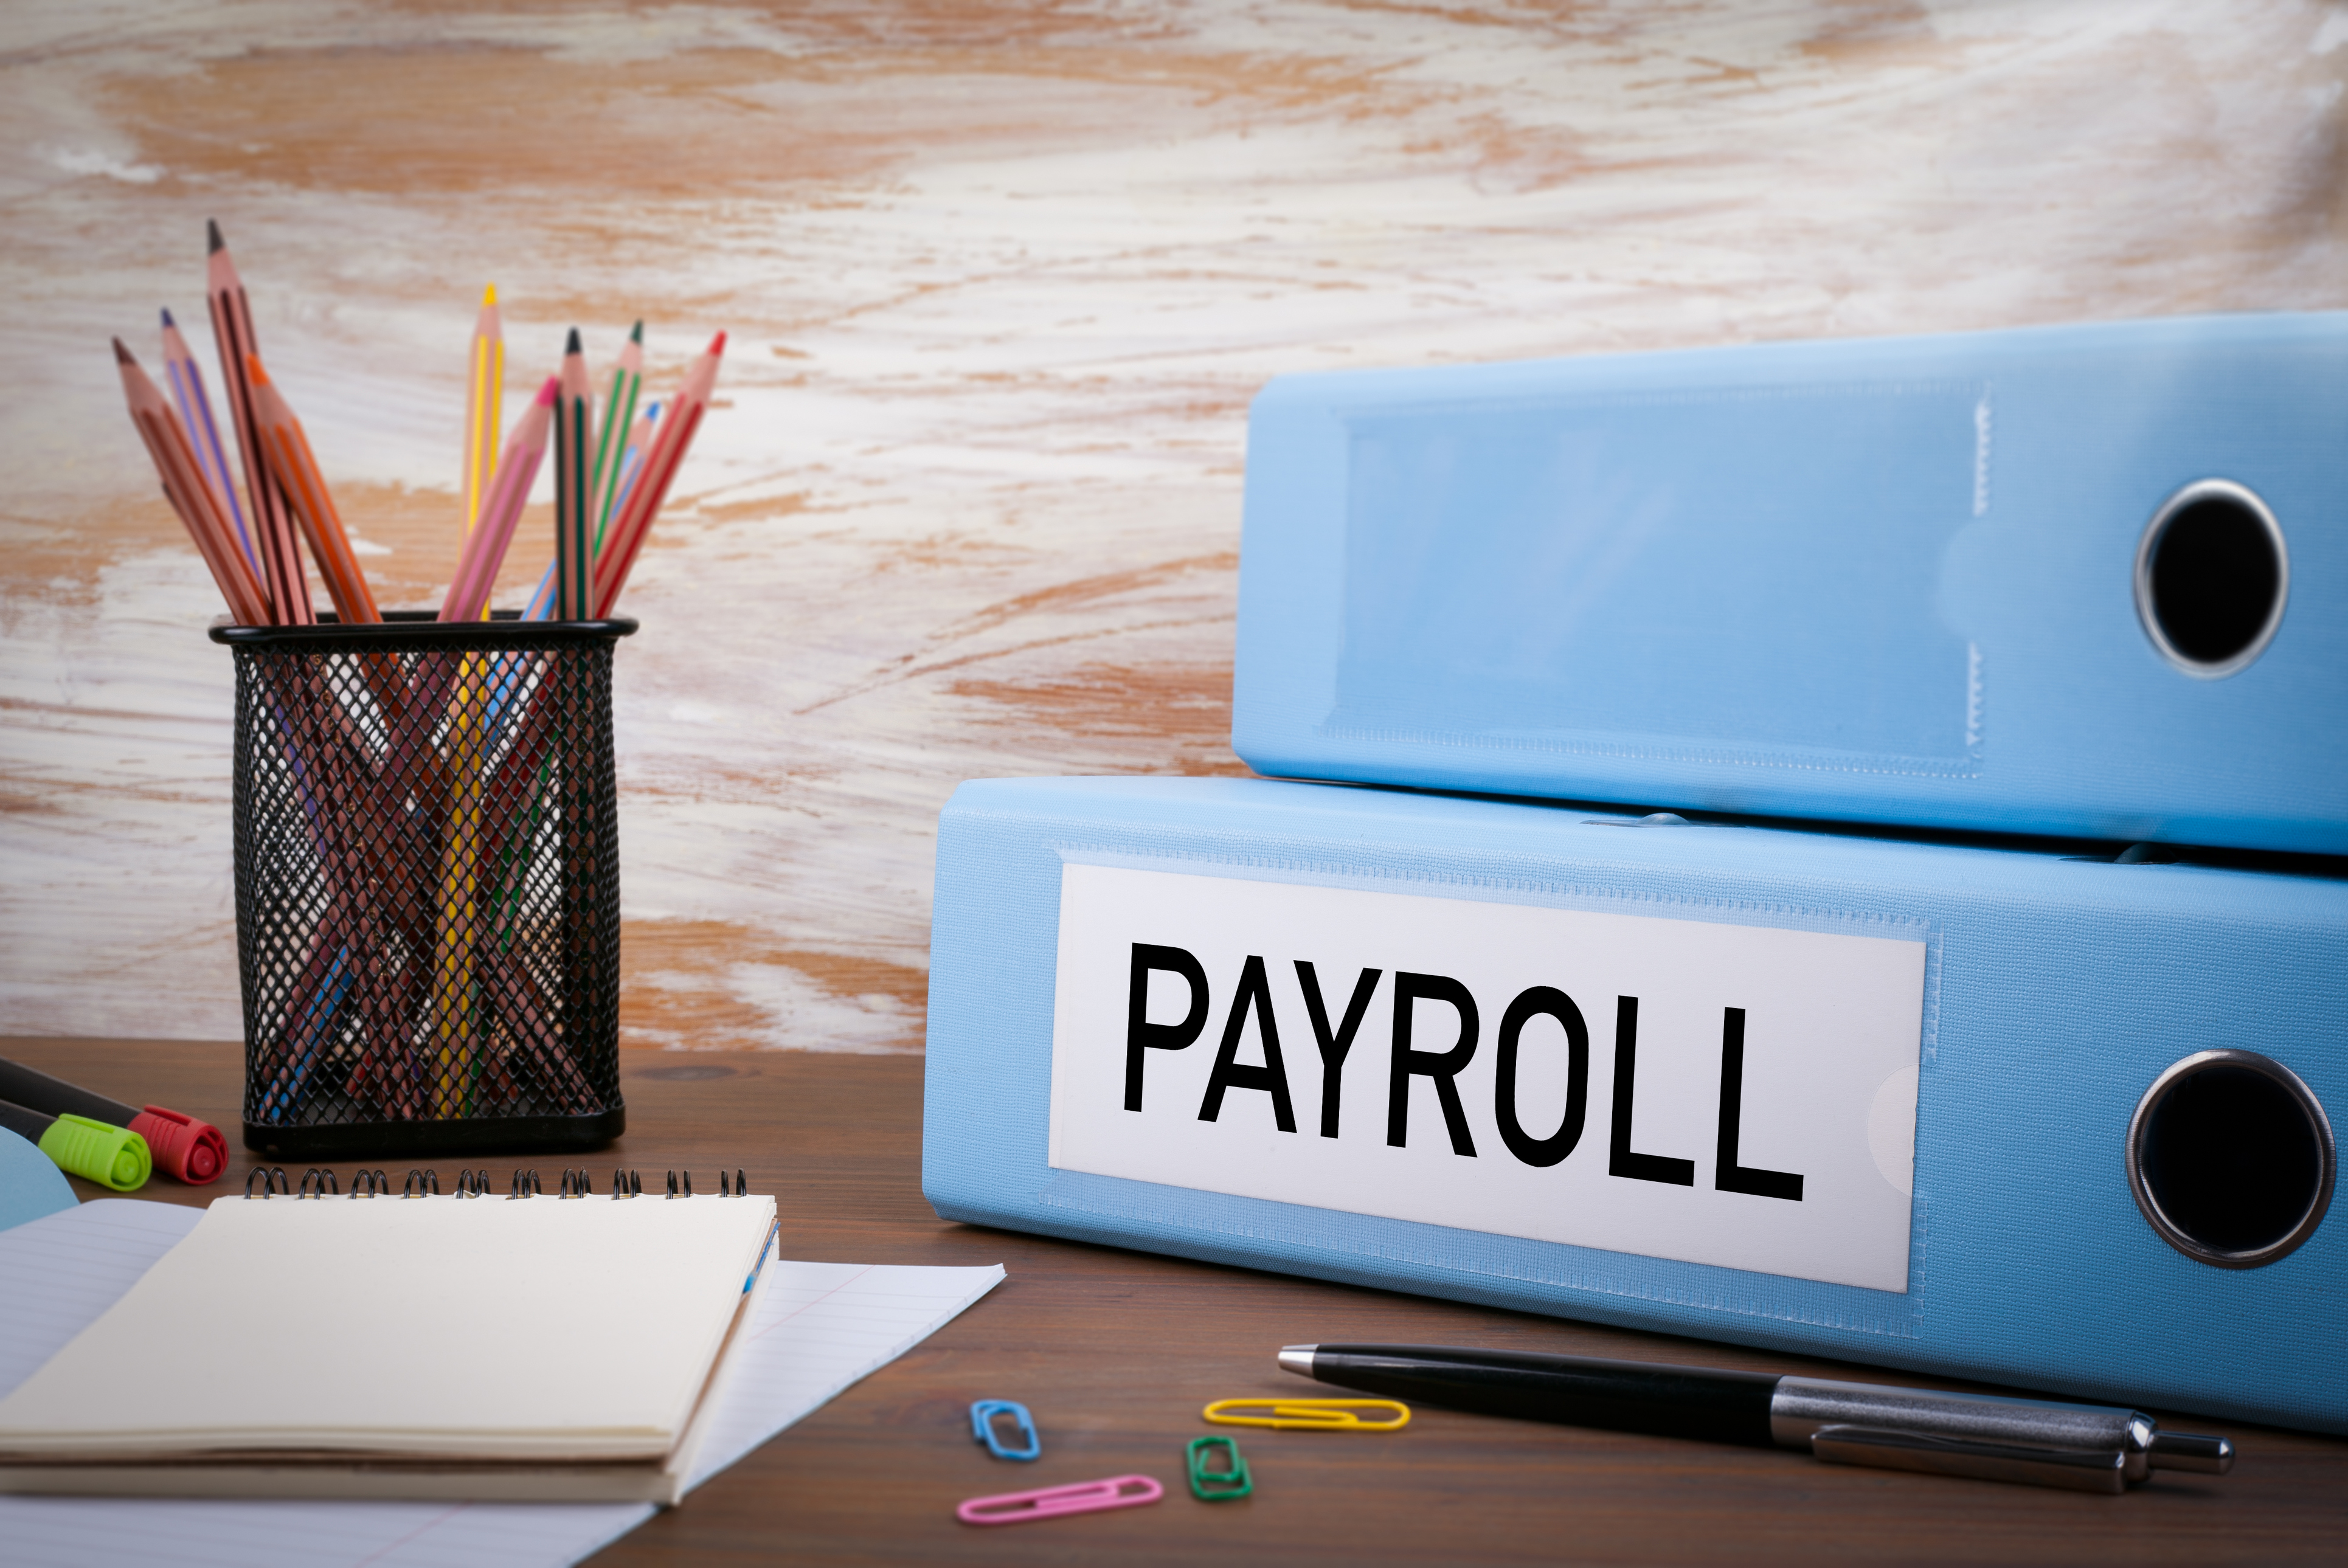 PAY101 Online - Introduction to Payroll